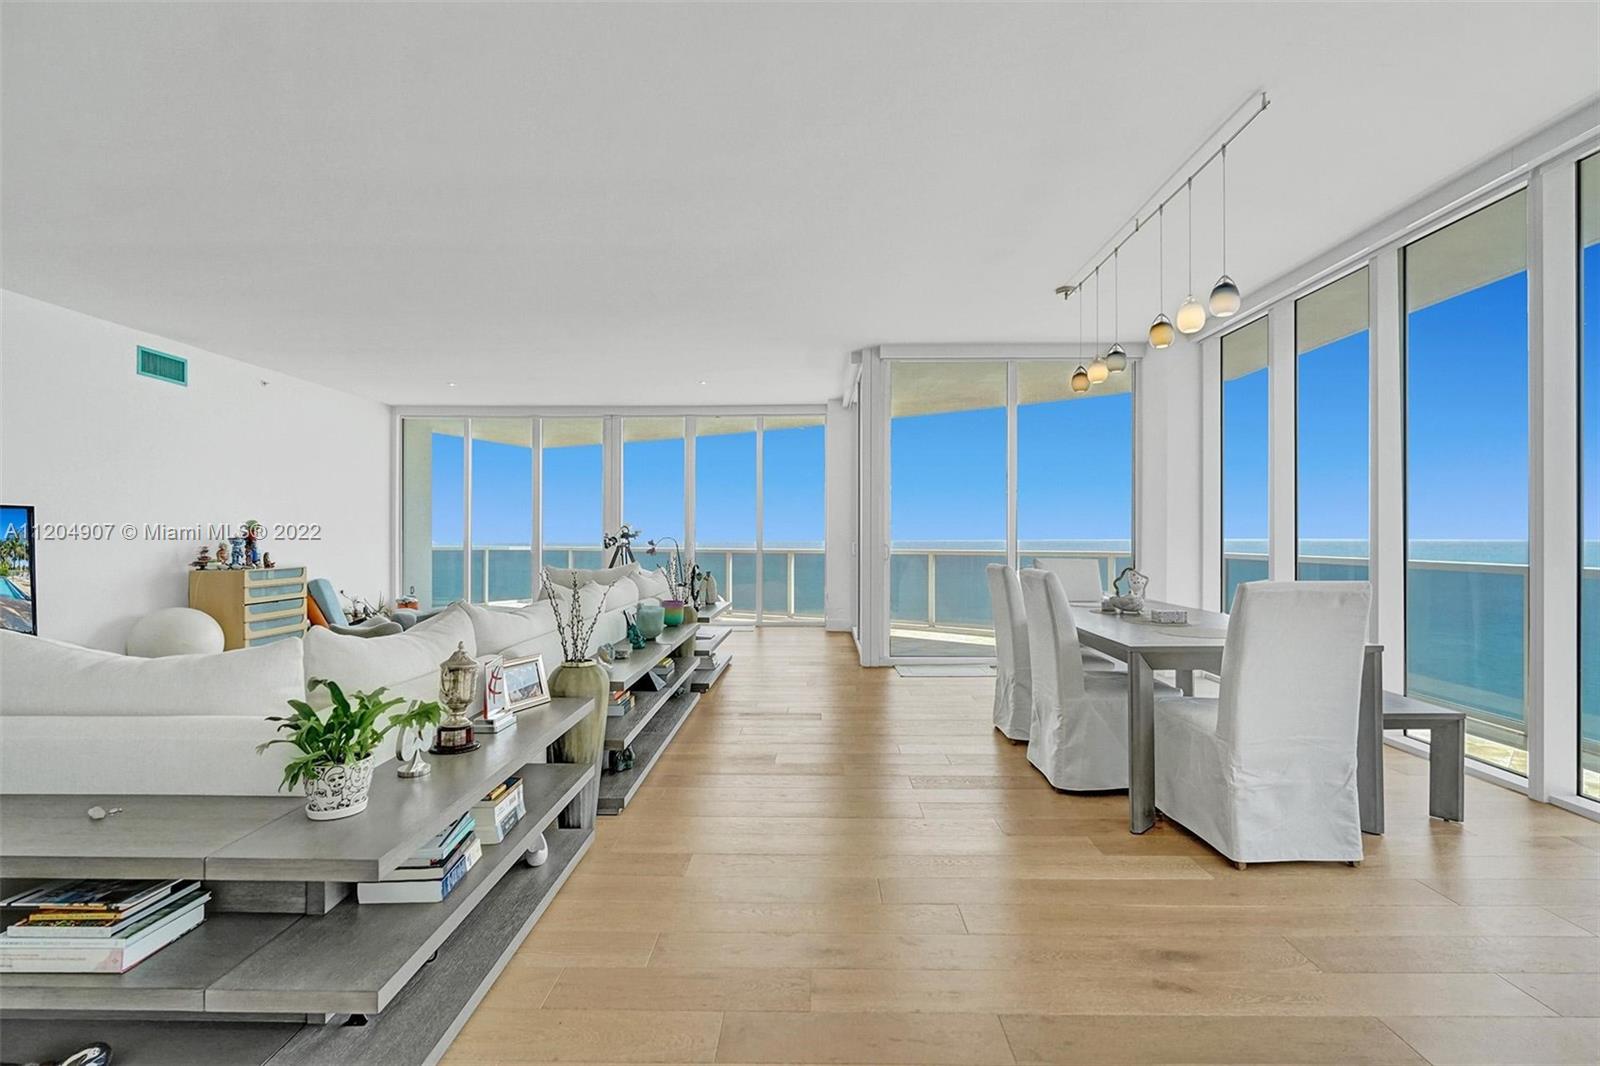 Magnificent residence  at the Bellini, the crown jewel of Bal Harbour. With direct ocean views as you enter from the private elevator, this corner unit has a wrap around balcony with amazing ocean views. Fully renovated, a huge master suite with three separate custom closets and large master bathroom. 
3 bedrooms plus den. White glove service with 5 star amenities including a private beach club with 200 ft ocean frontage, oceanfront heated pool, café, spa, 24 hour concierge and security. Walking distance to the shops at Bal Harbour.